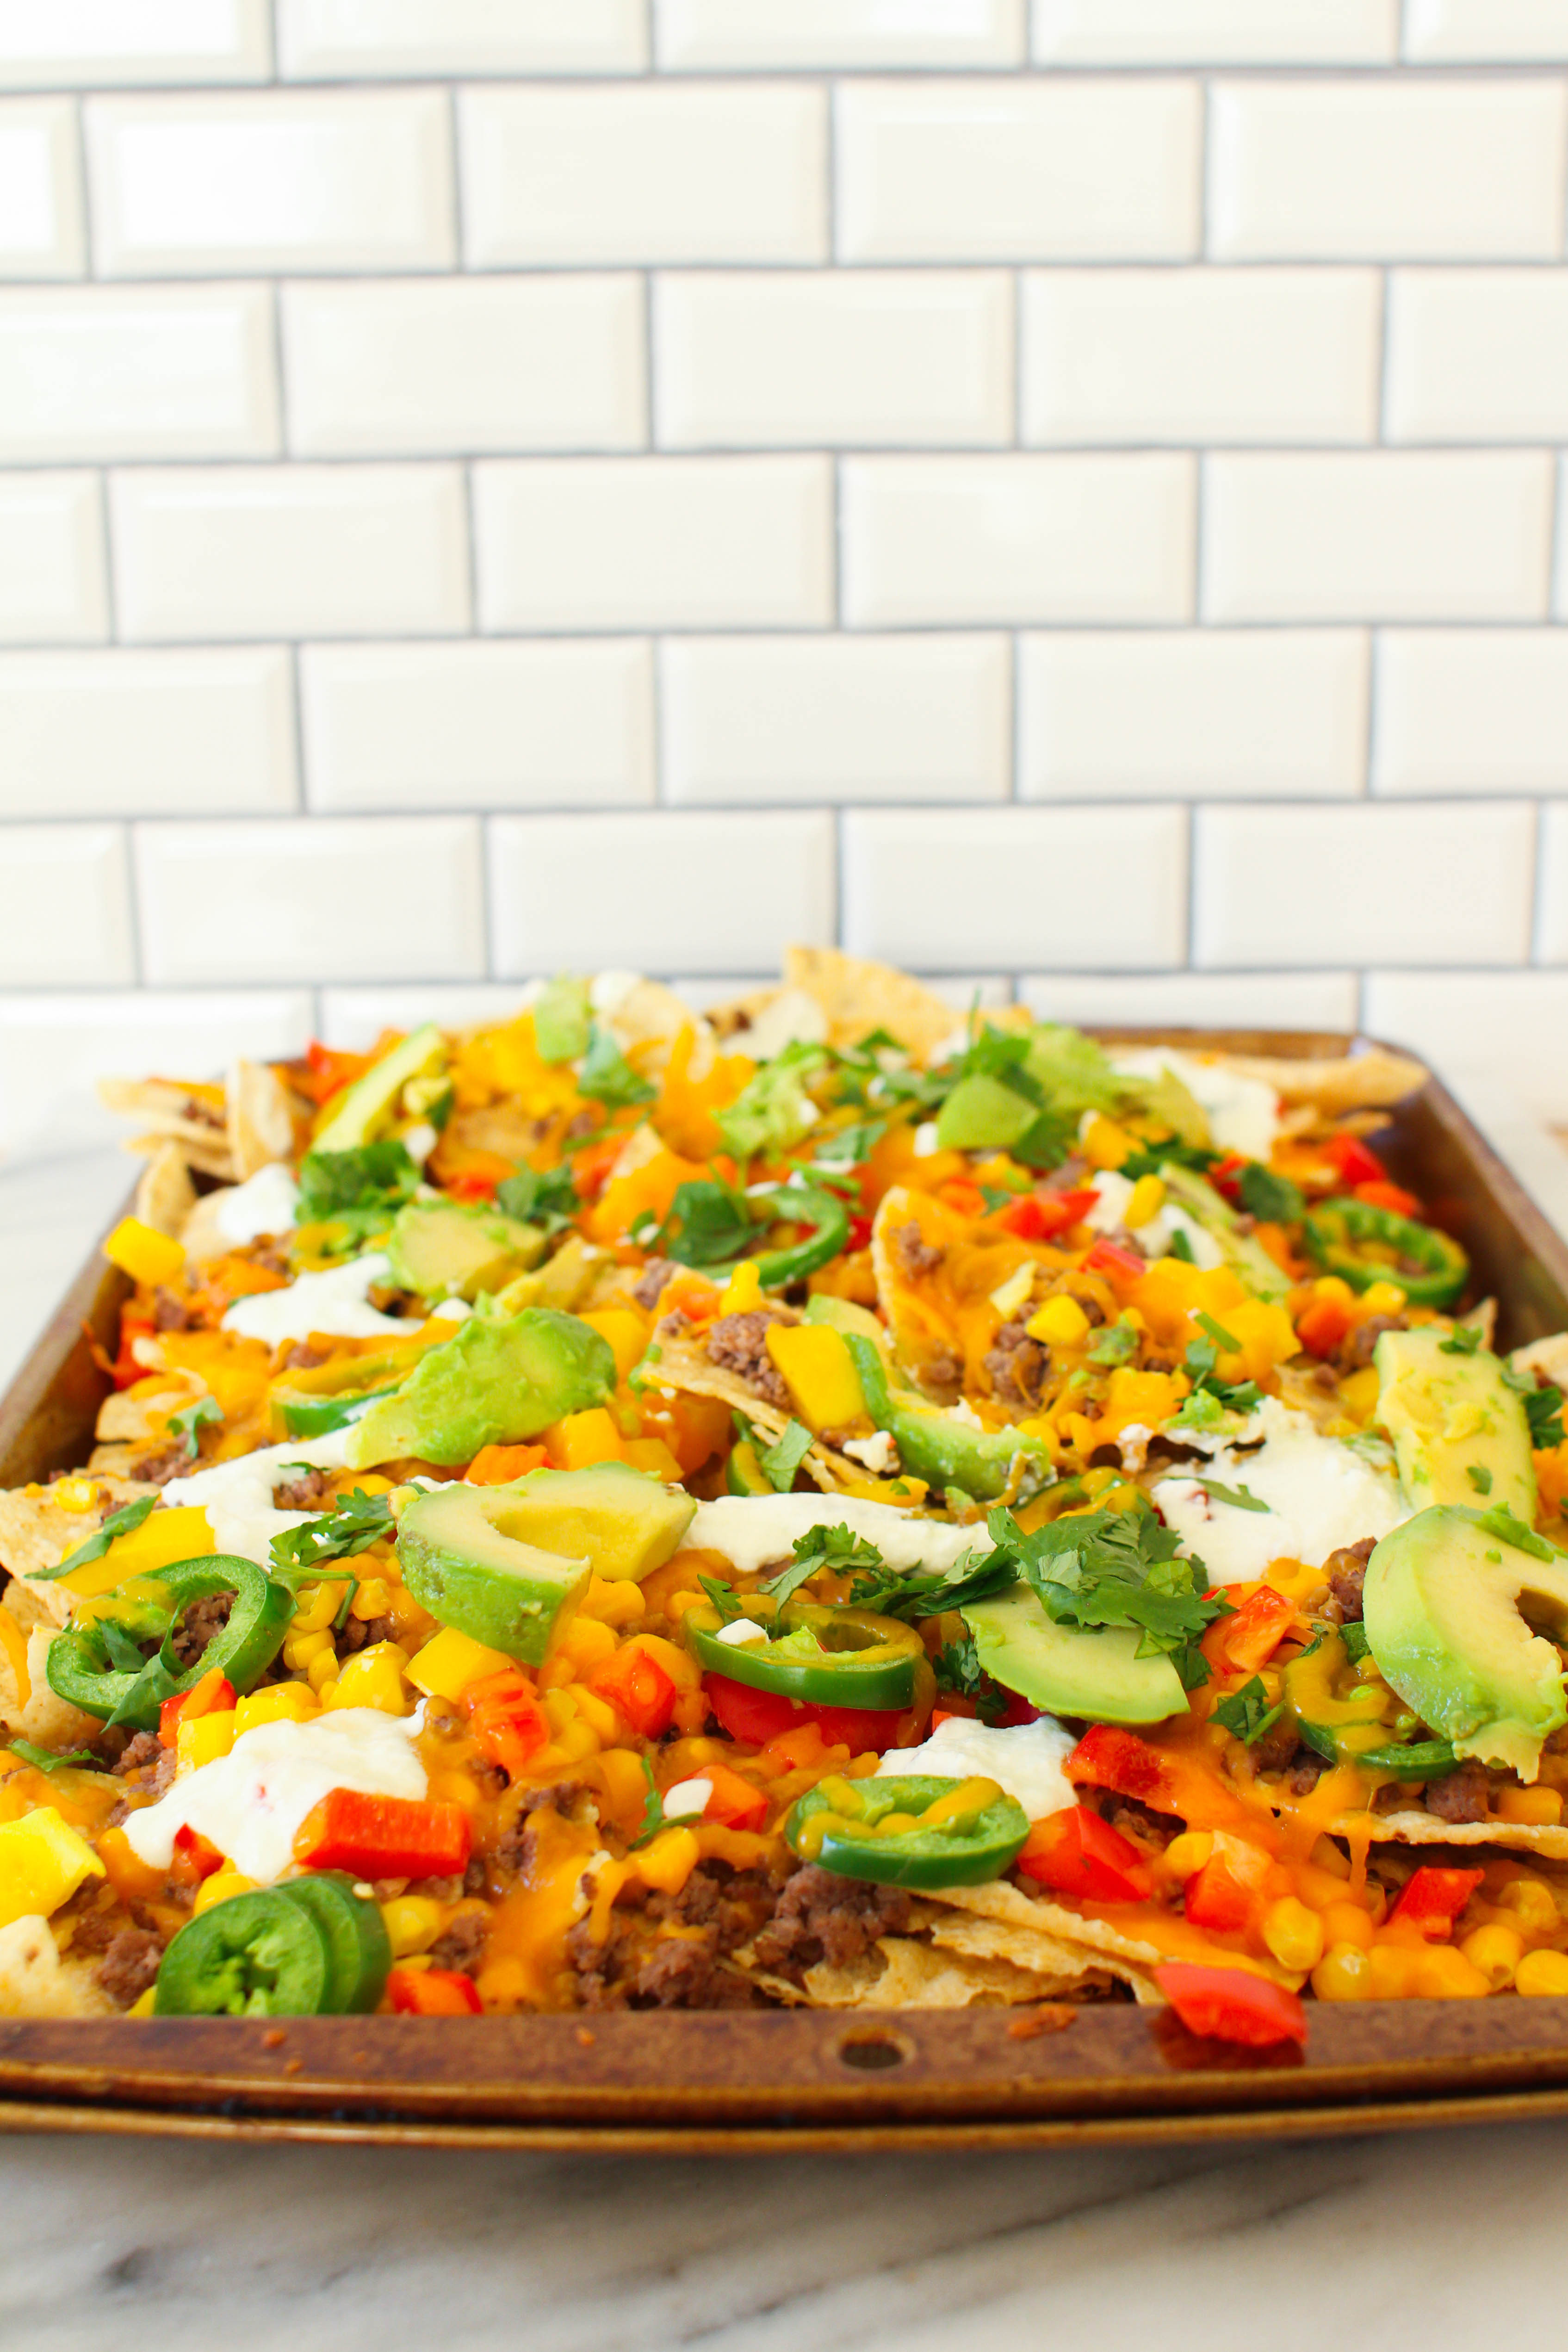 Perfect for game day, these cheesy beef sheet pan nachos can feed a crowd. Tortilla chips topped with seasoned ground beef, corn, peppers, jalapenos and cheese and baked until crispy and melted. Topped with sour cream, avocado and cilantro. 